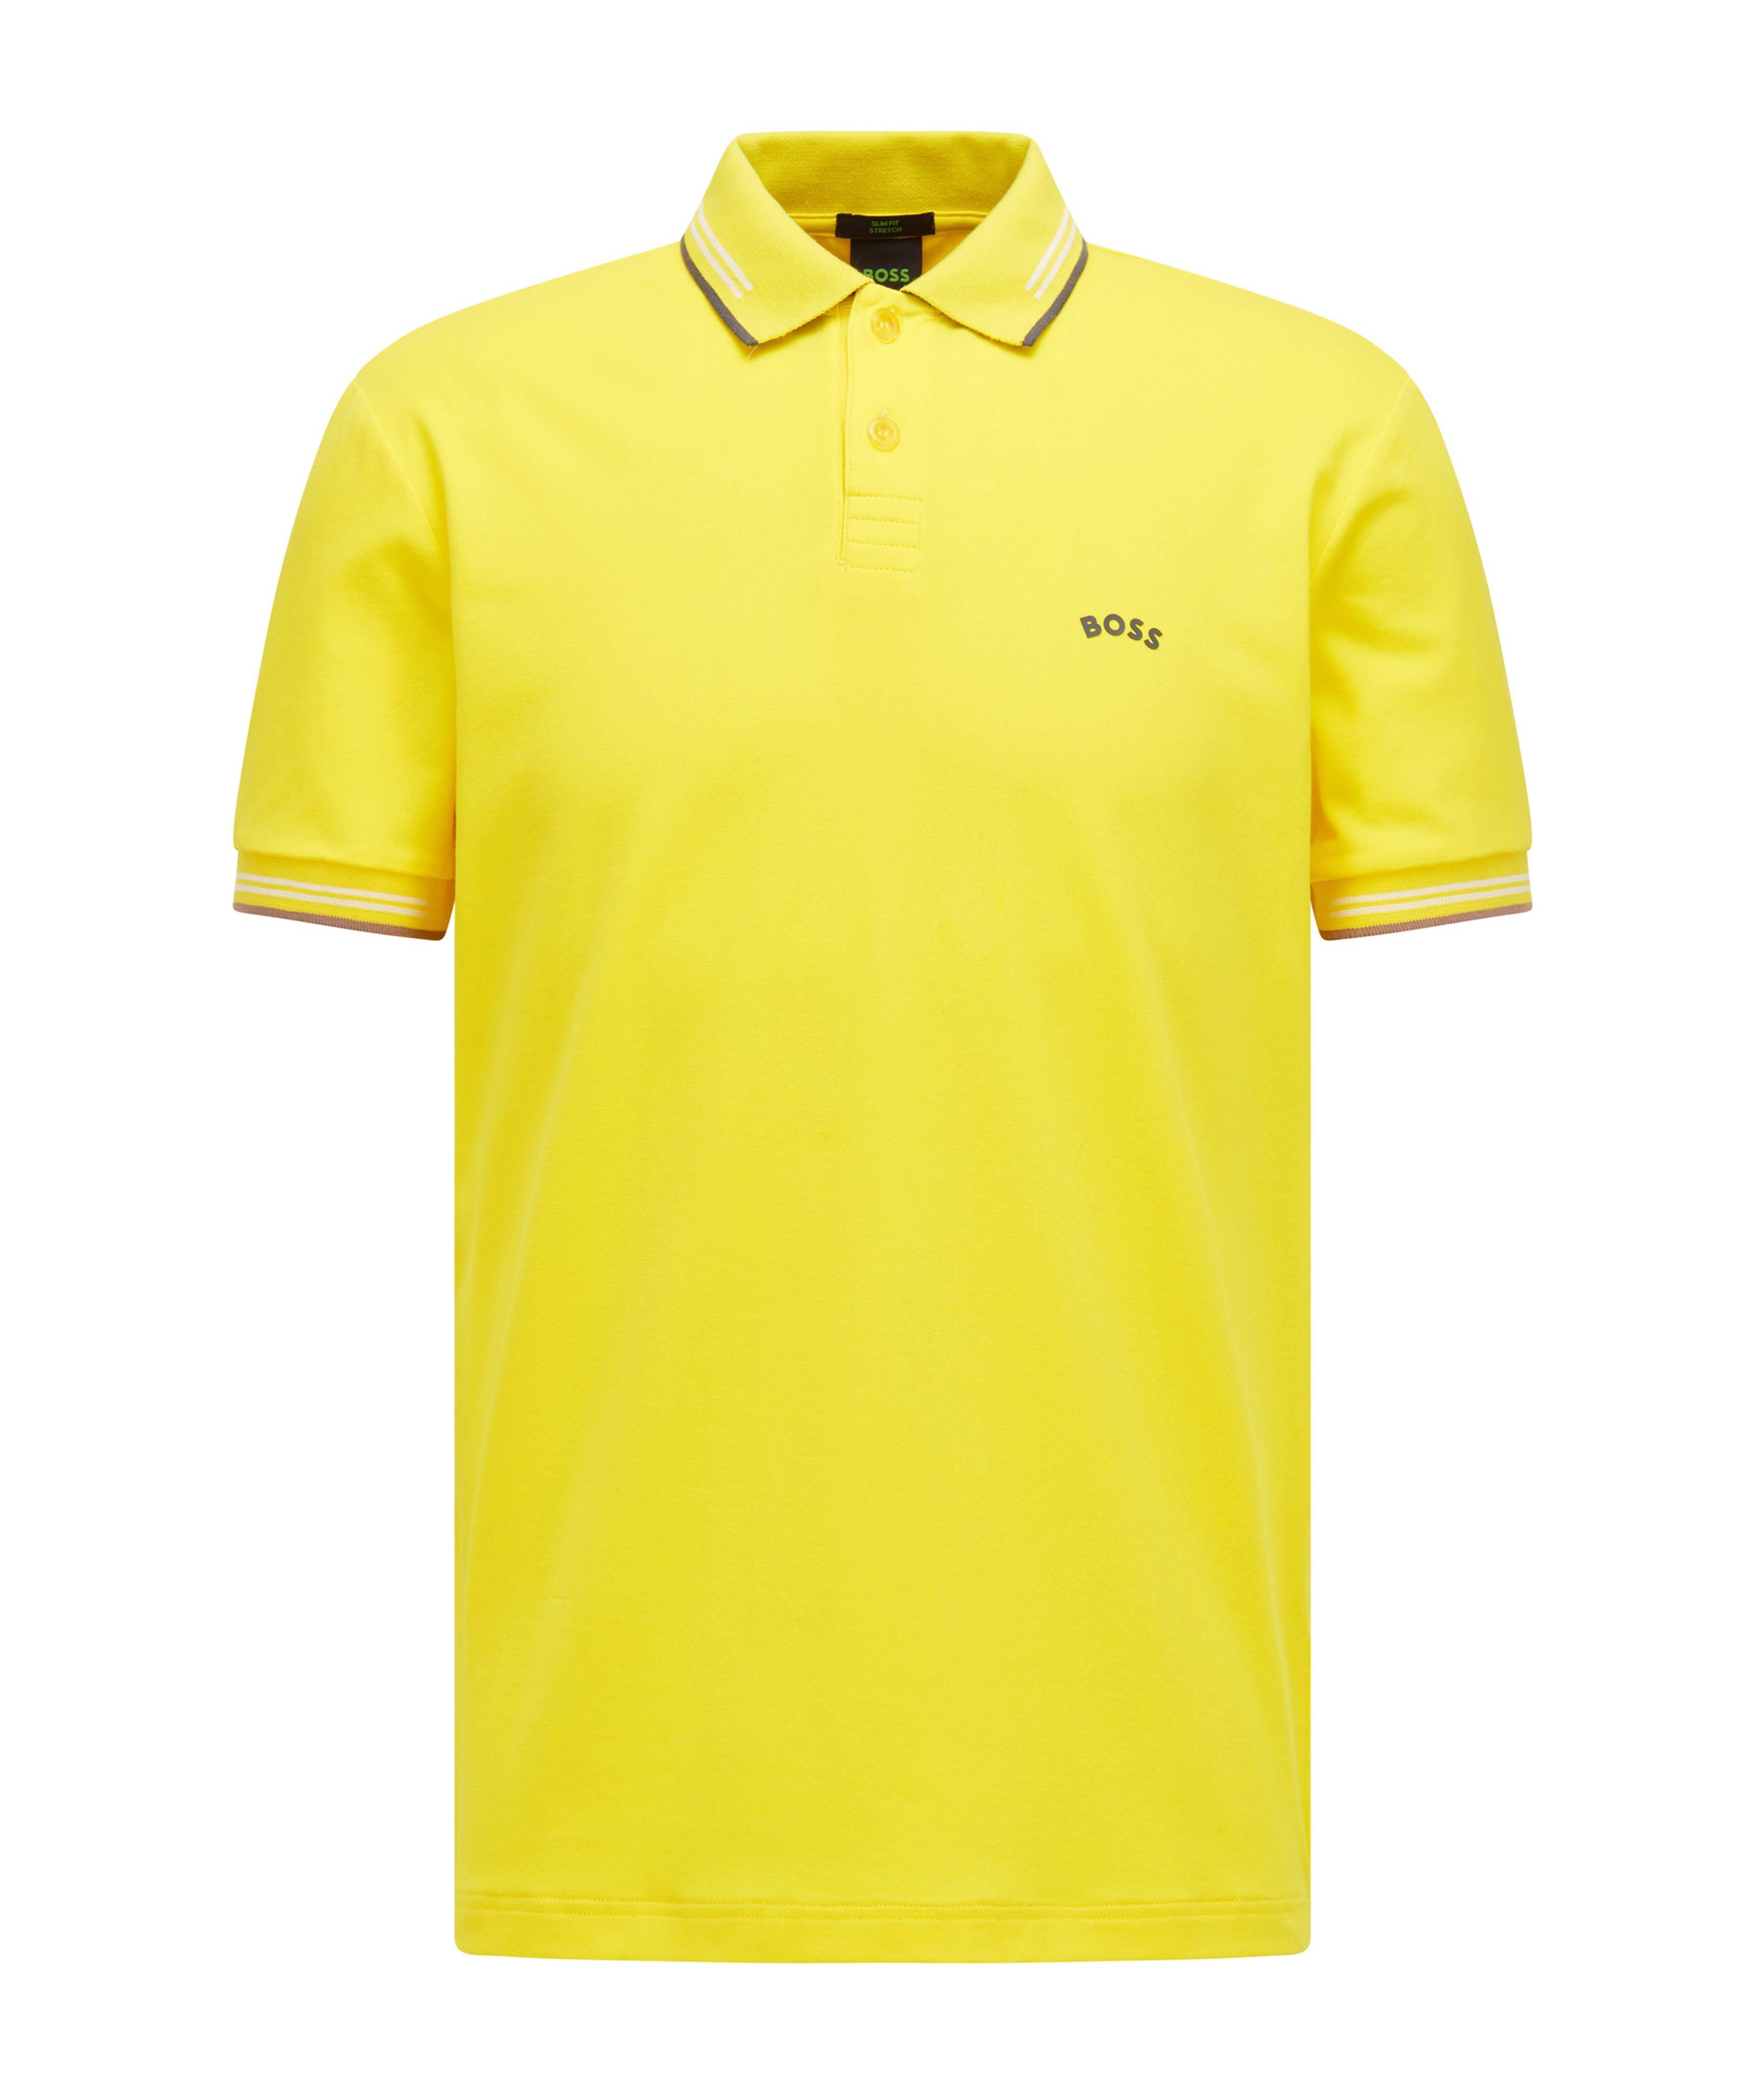 Paul Curved Stretch-Cotton Polo image 0